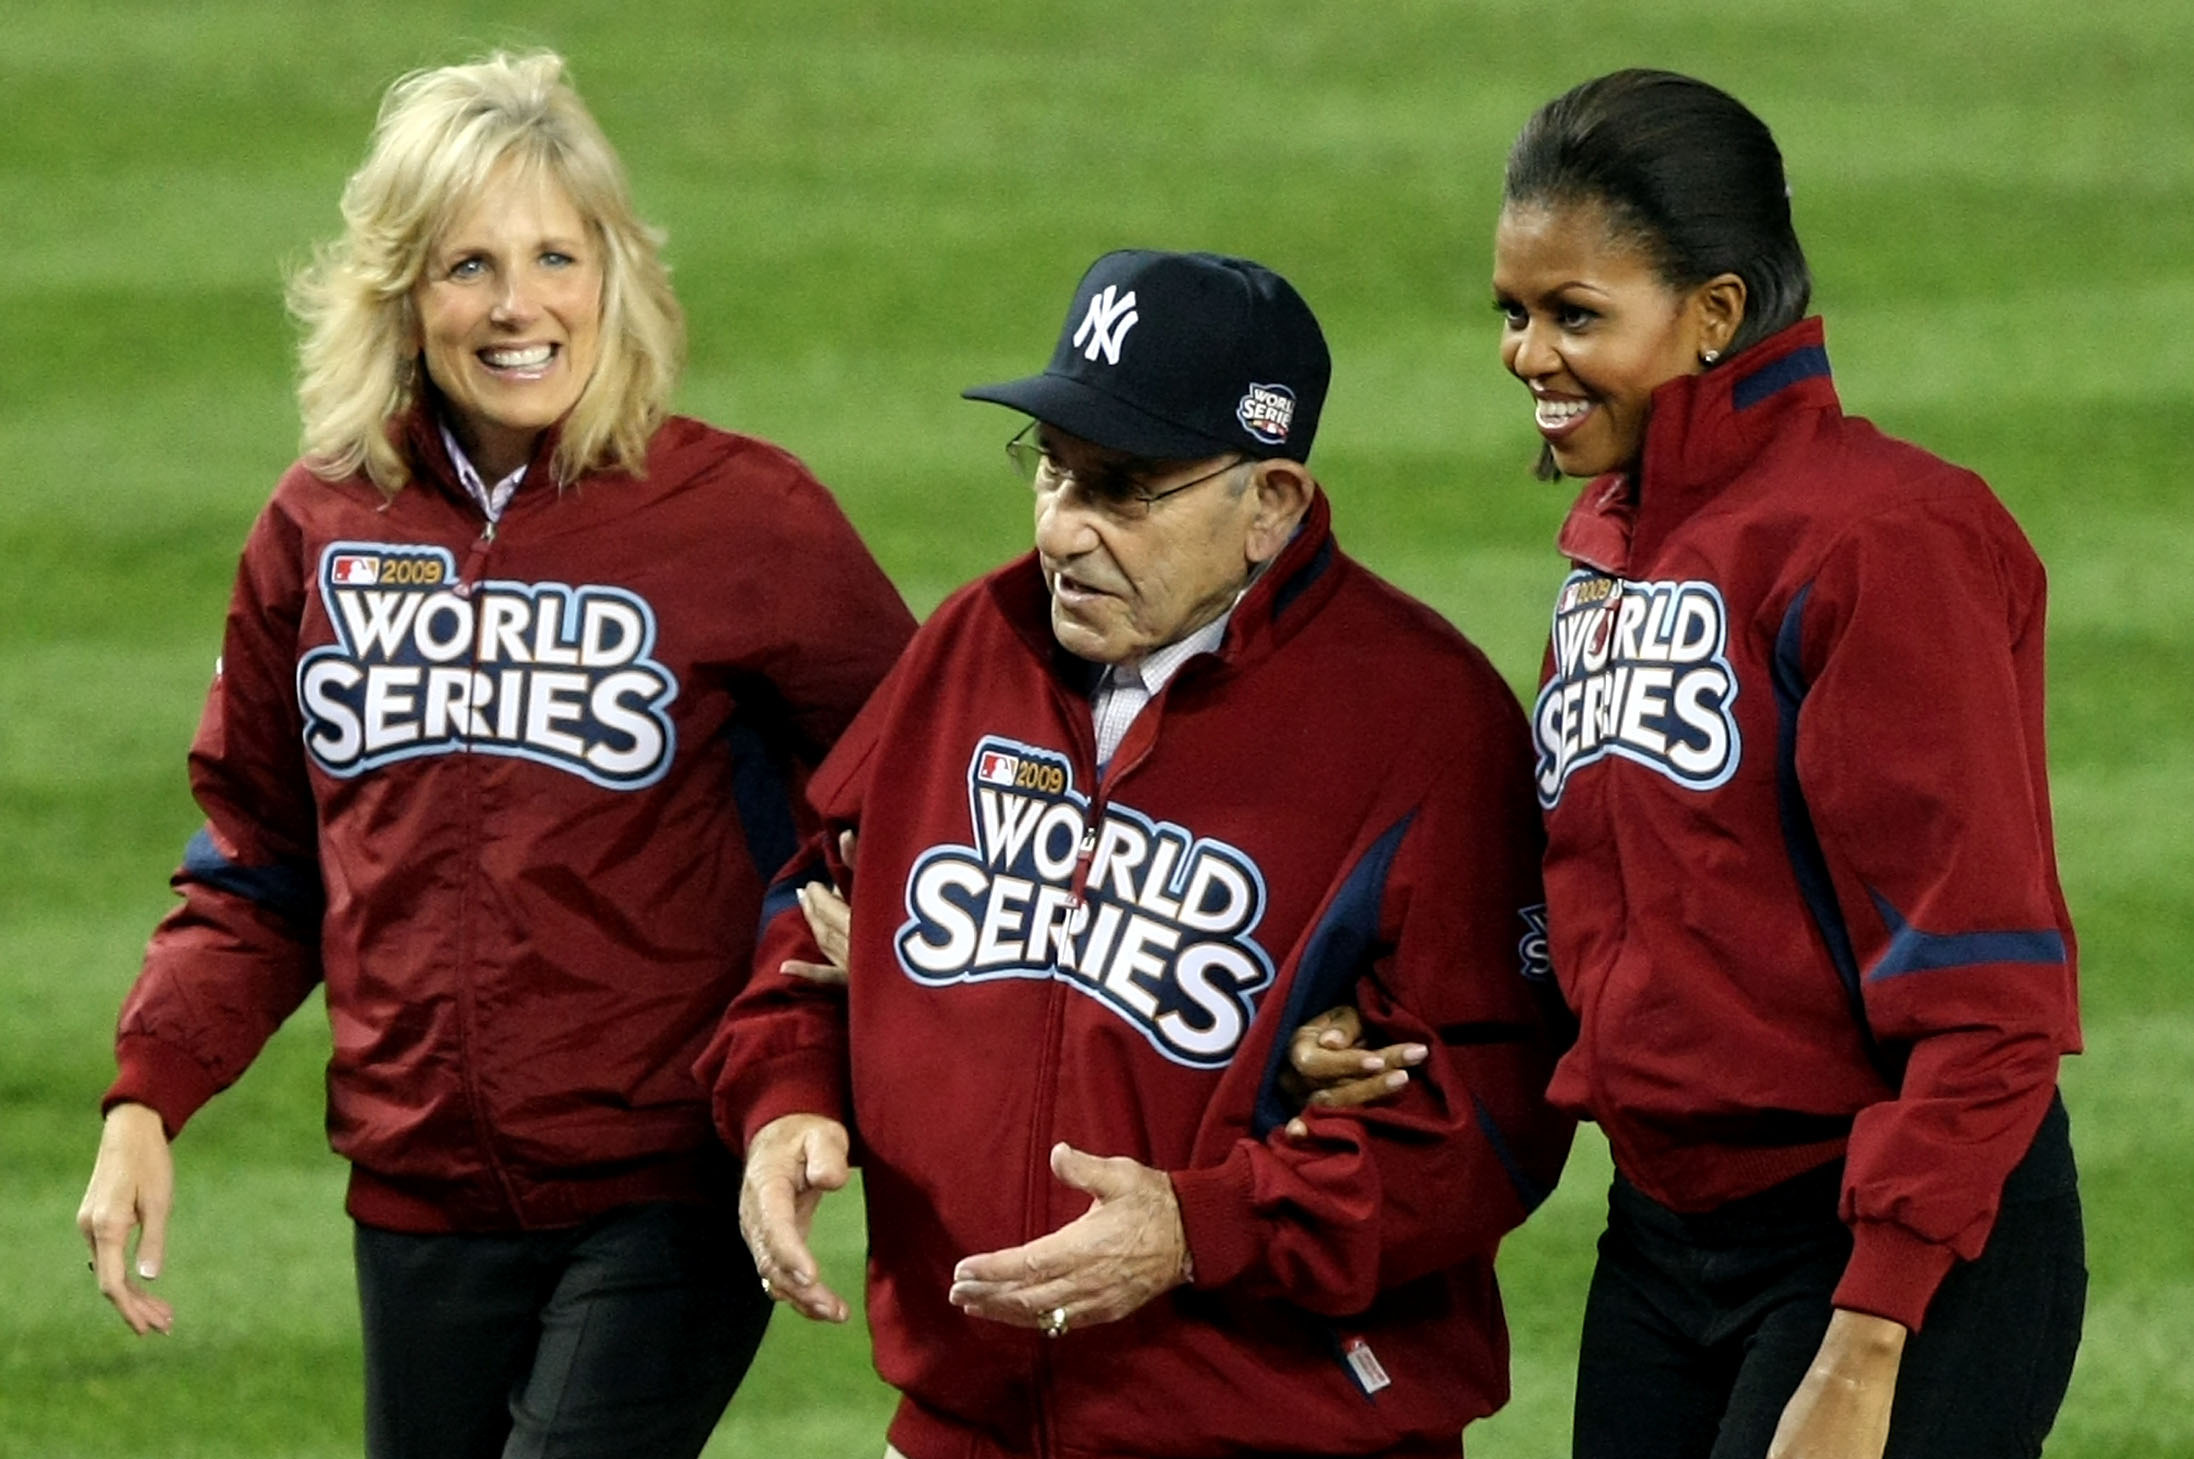 Yogi Berra's Incredible Feat for the Yankees That No Slugger Will